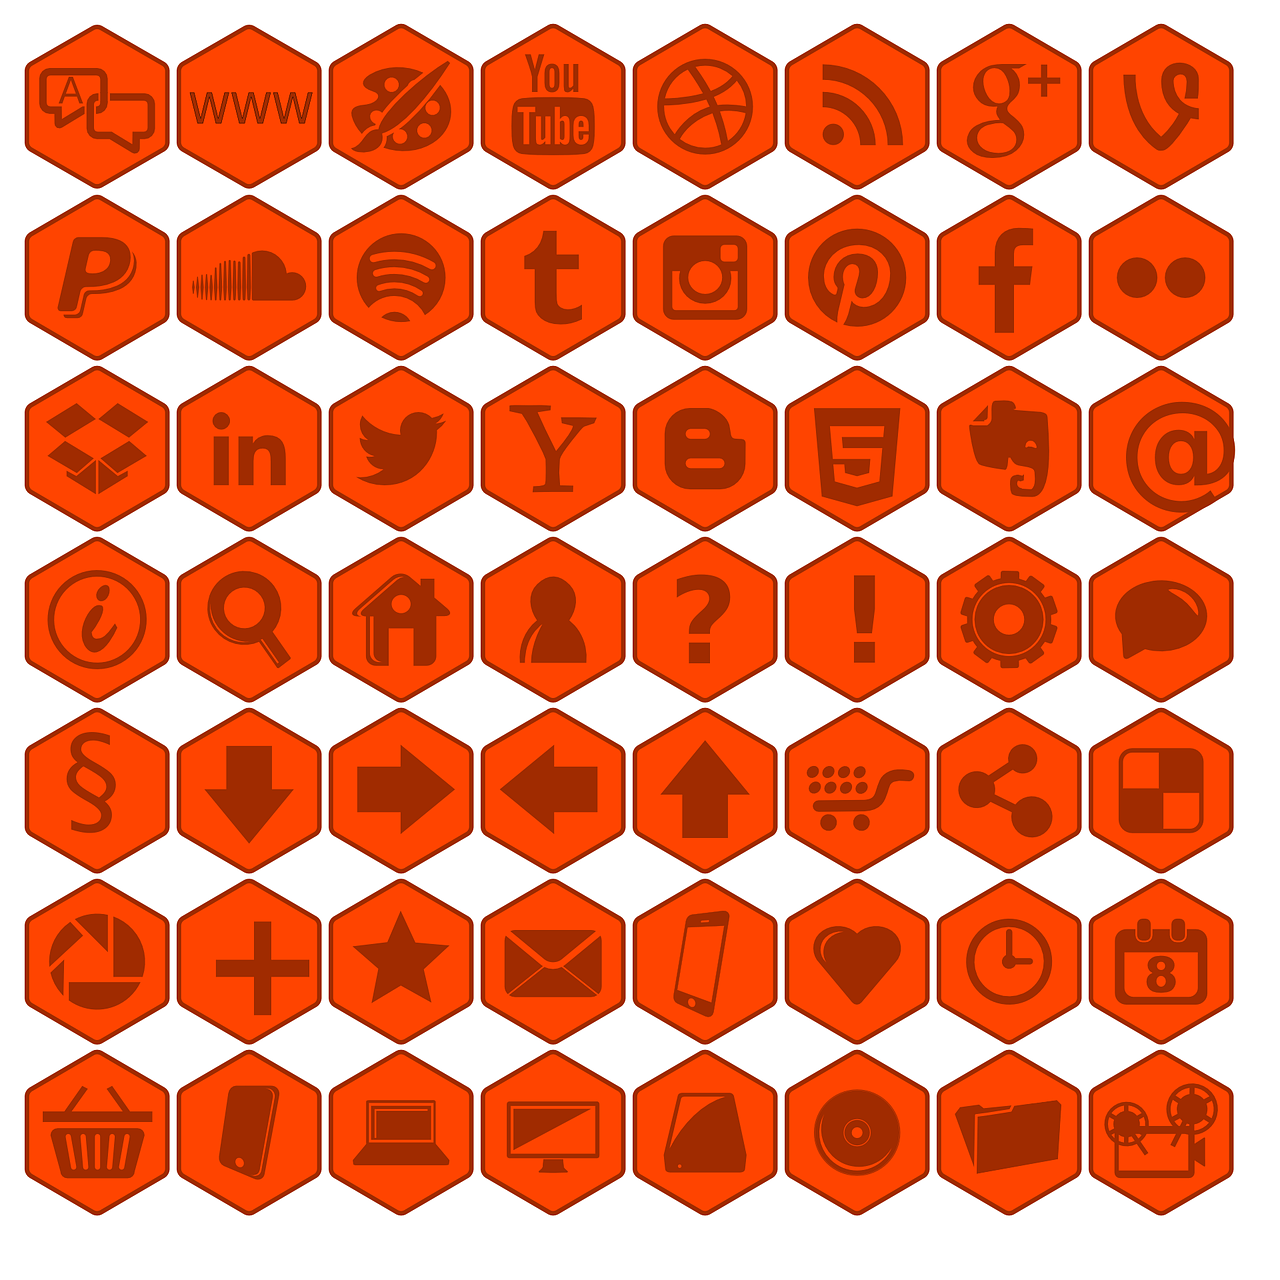 a set of orange hexagonal icons on a white background, by Justin Sweet, reddit, detiled, social media, 6 0 s, red monochrome